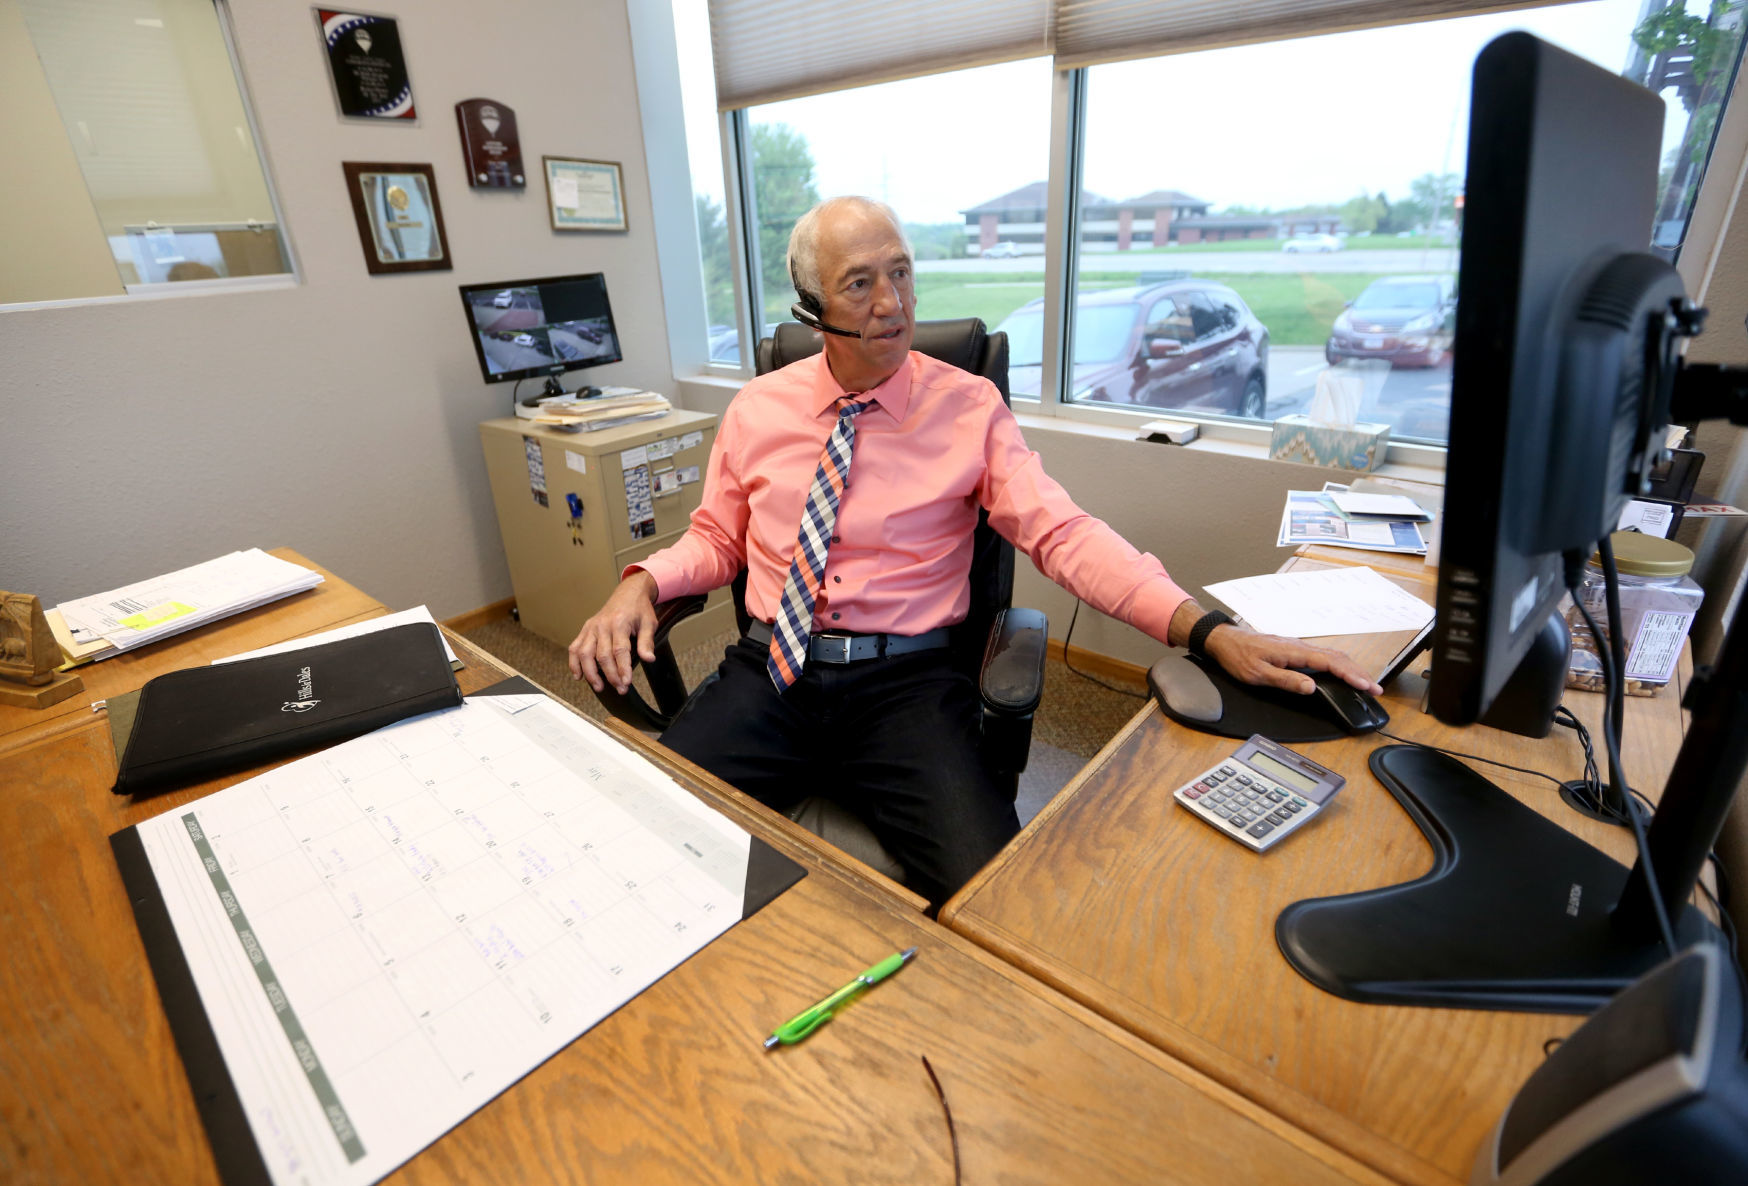 Greg Adams, owner and broker at ReMax Advantage Realty, works in his office in Dubuque. PHOTO CREDIT: Jessica Reilly